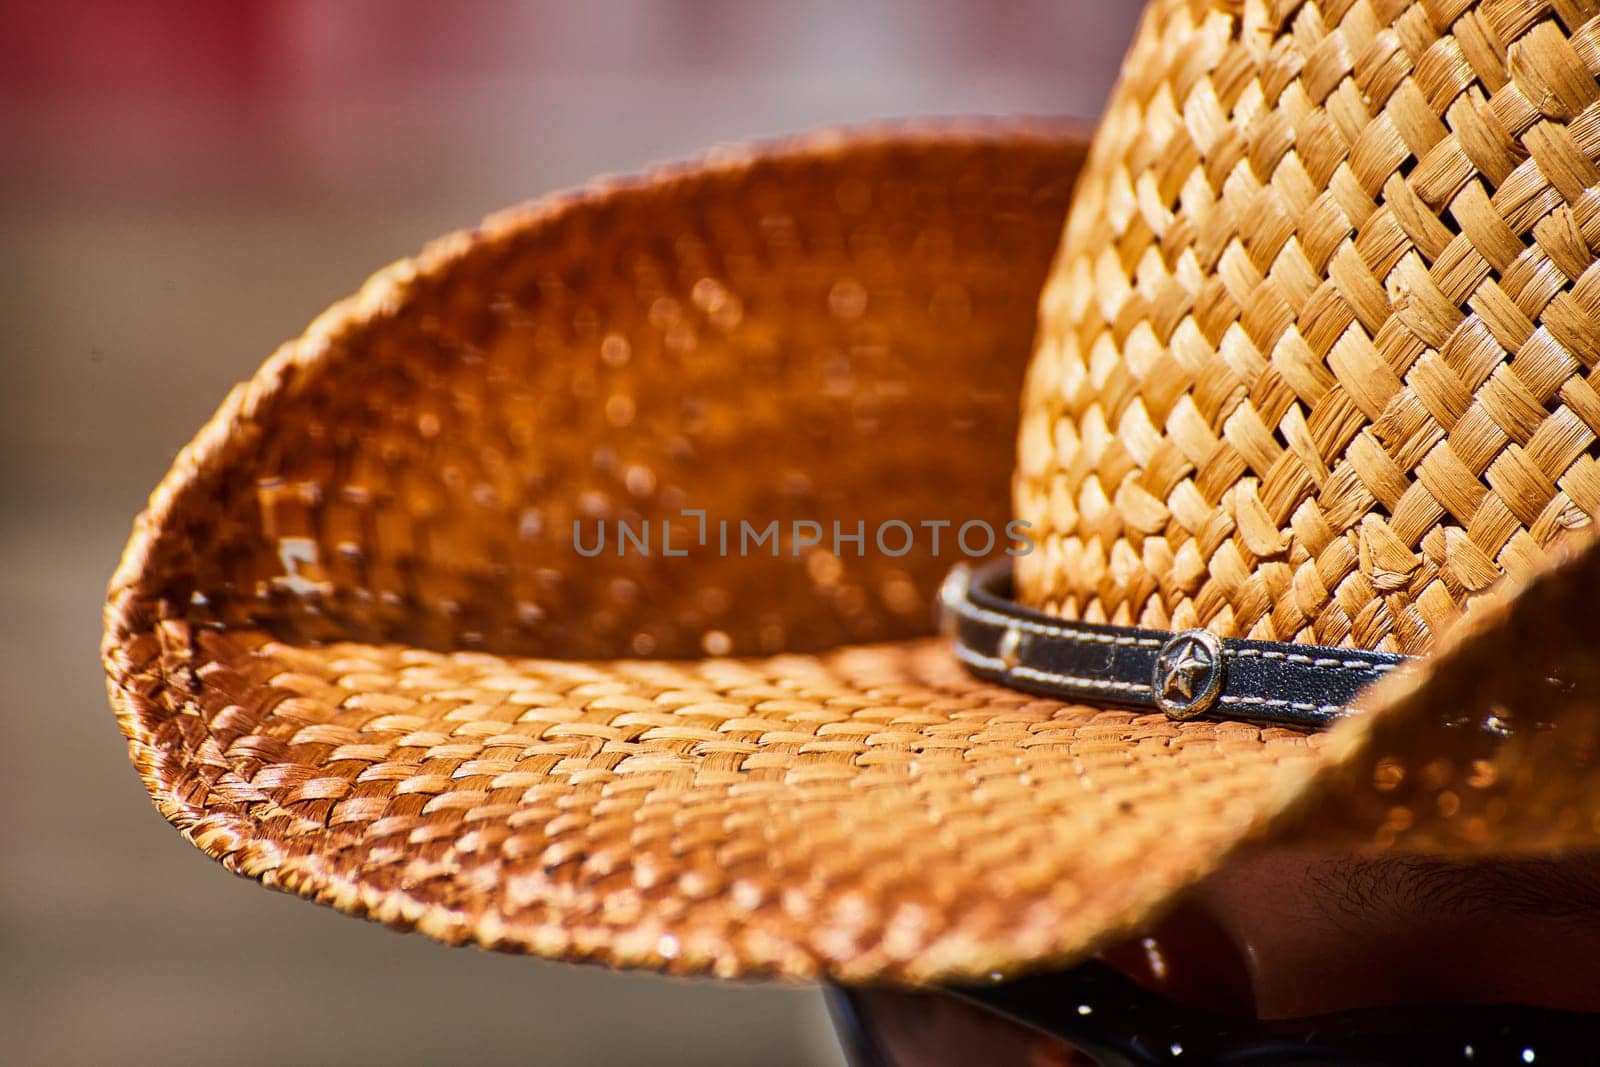 Elegant straw hat with a leather band, suggesting a rustic yet sophisticated style, set in a vibrant outdoor setting.